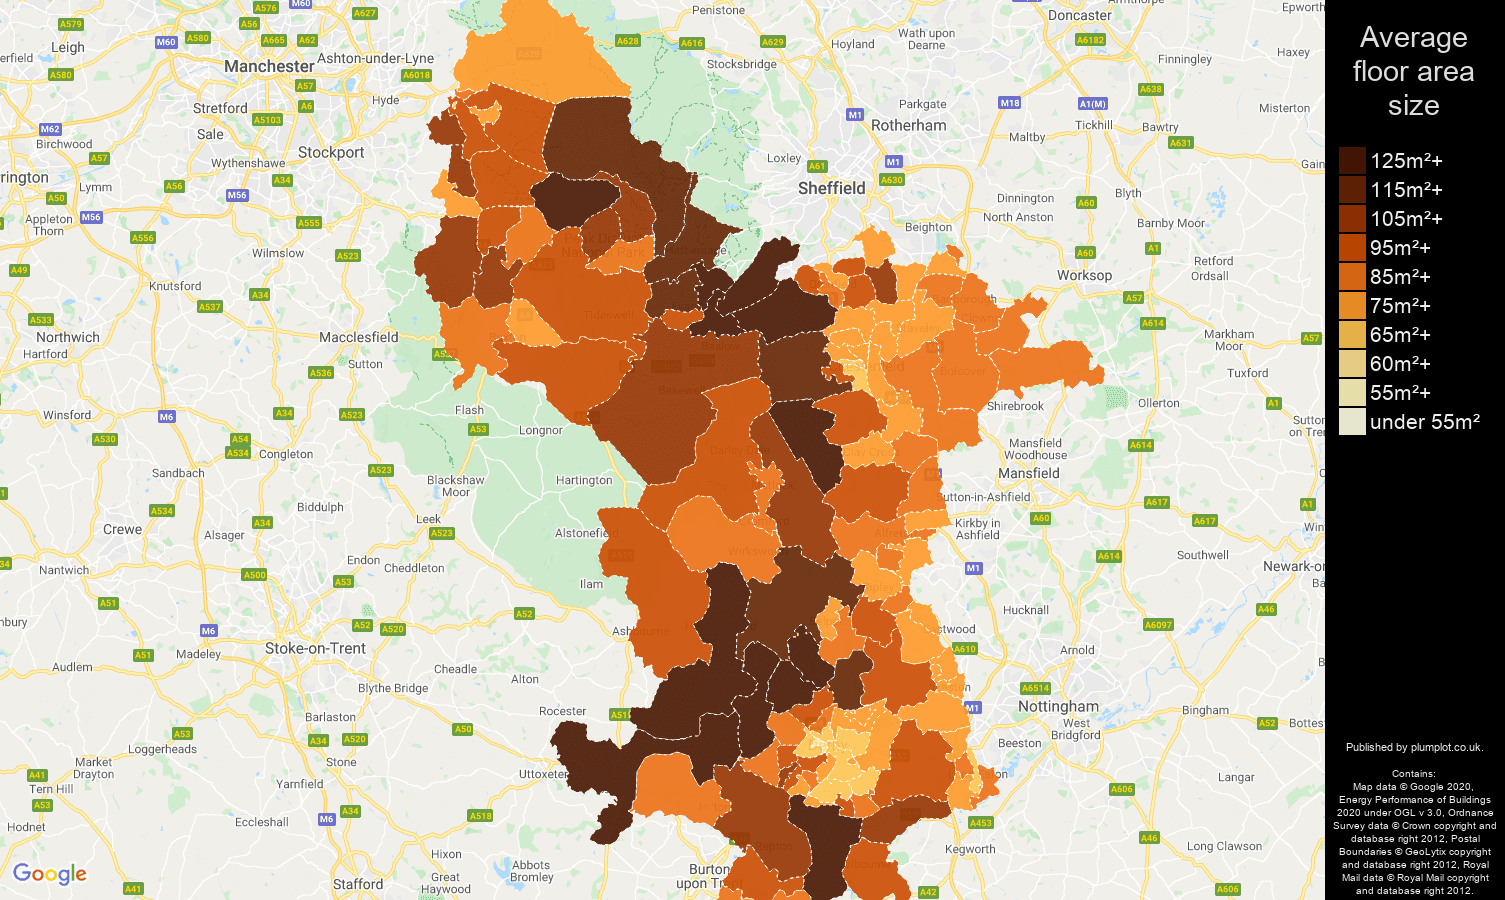 Derbyshire map of average floor area size of properties